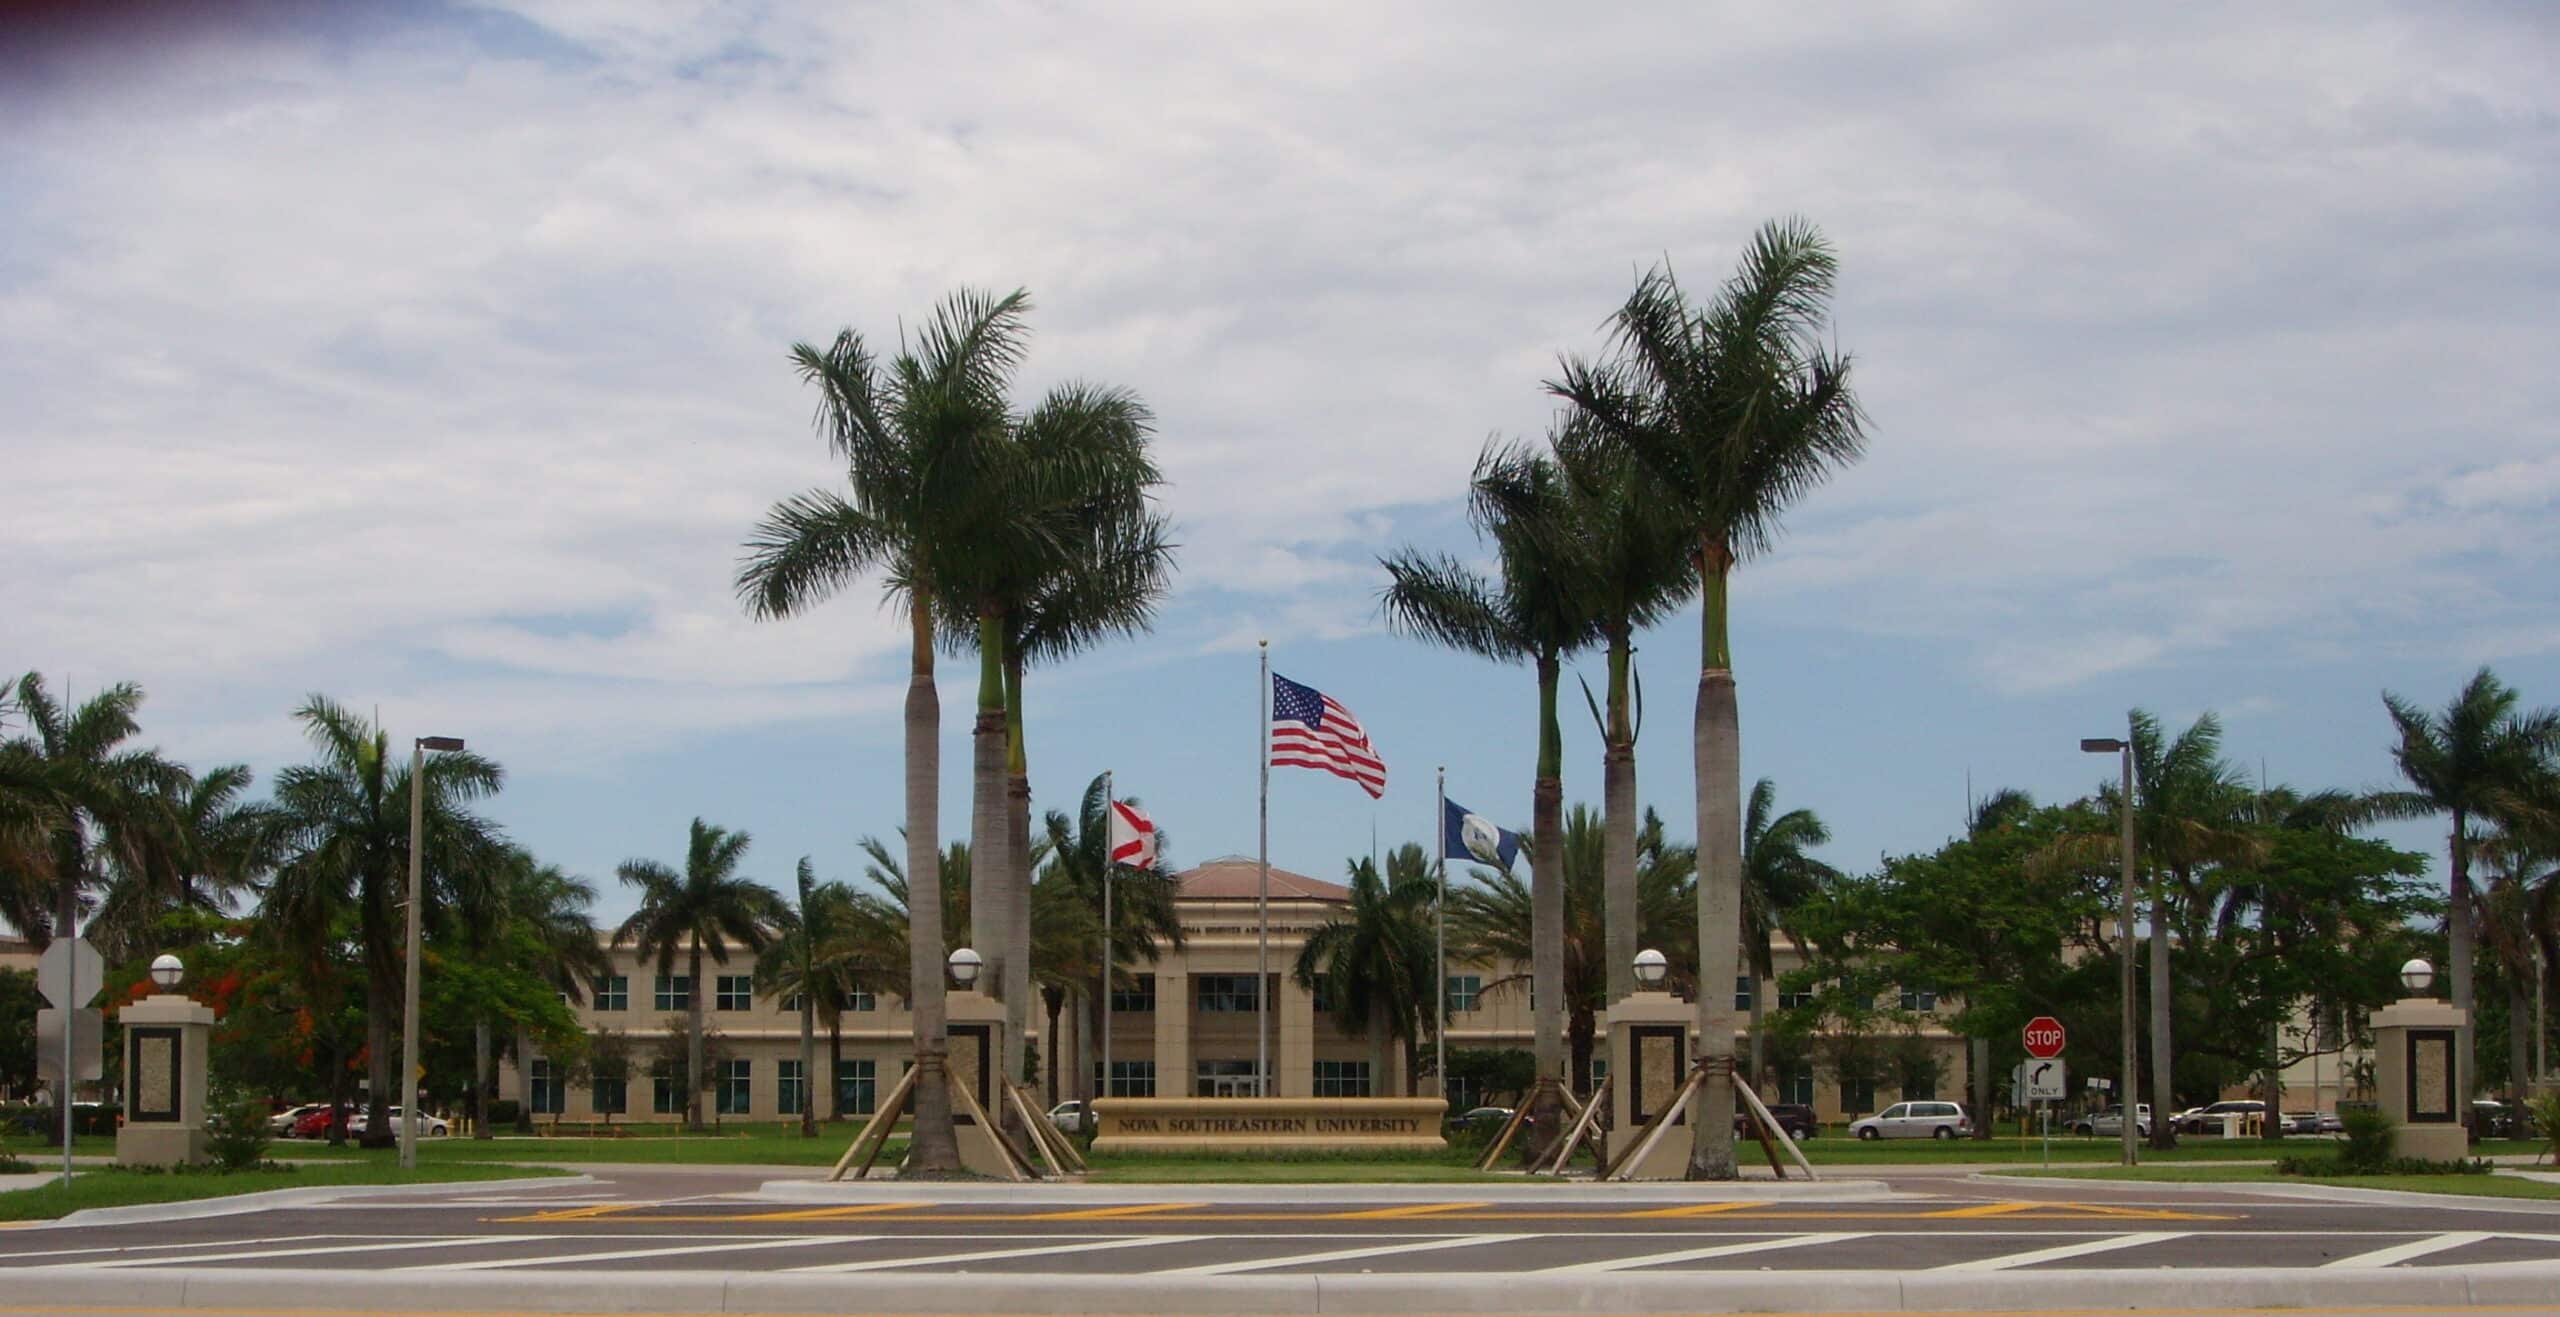 the front entrance of Nova Southeastern University, highlighted by palm trees and three flags